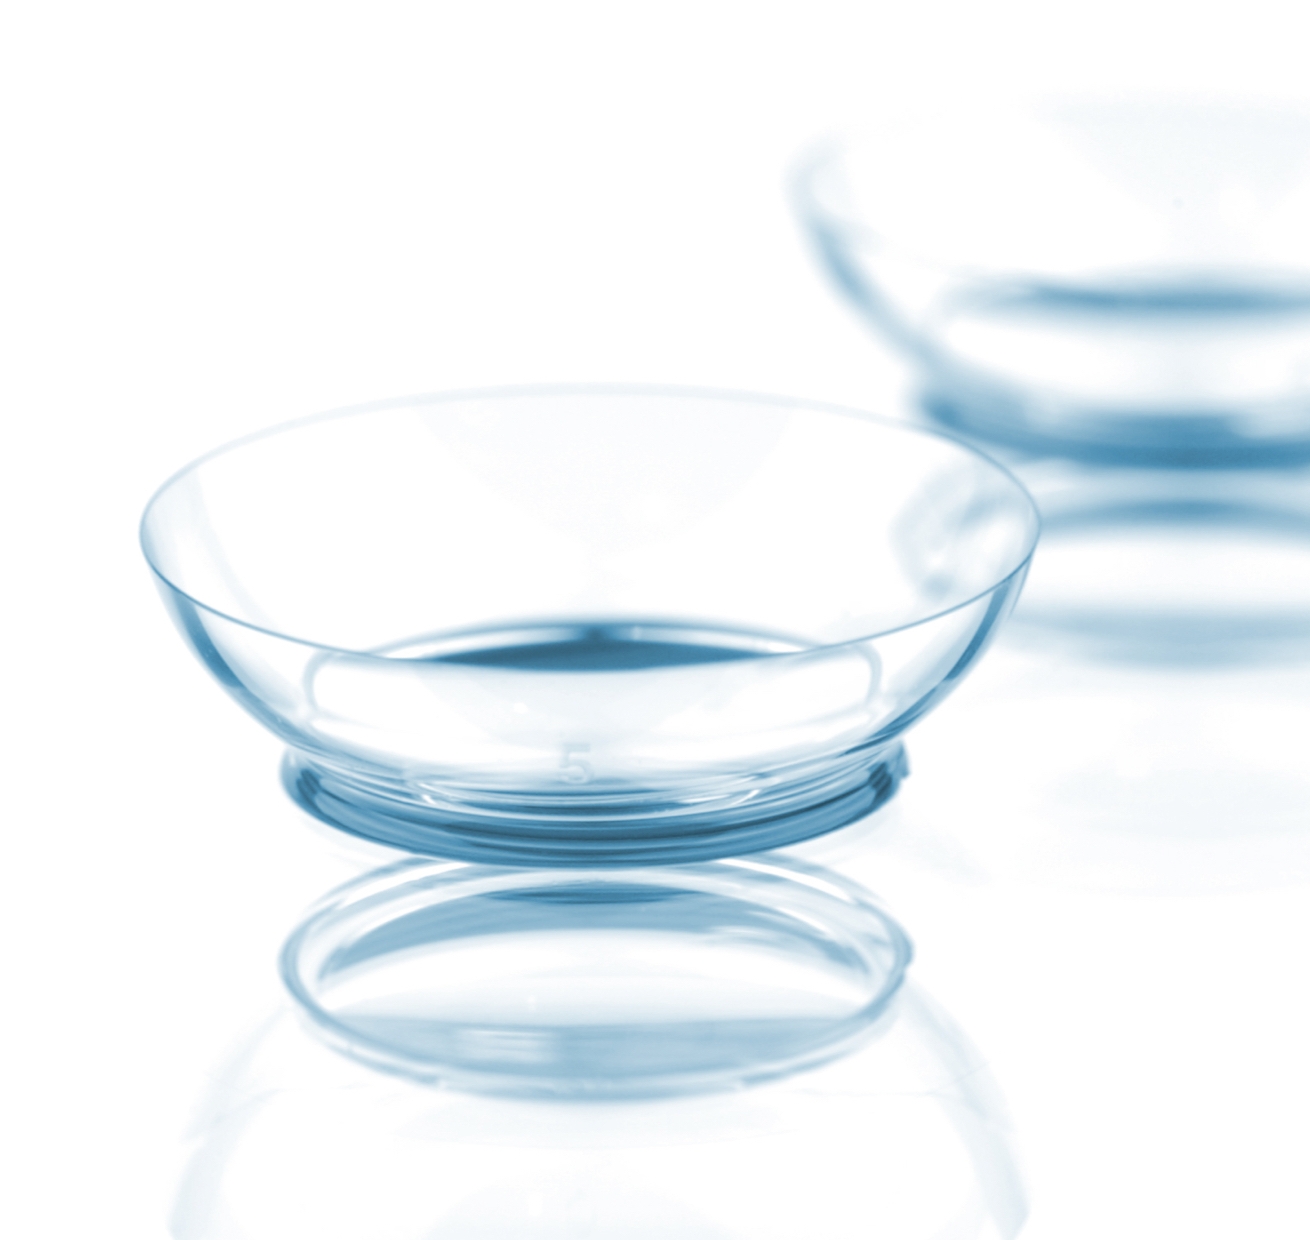 Contact lens product image